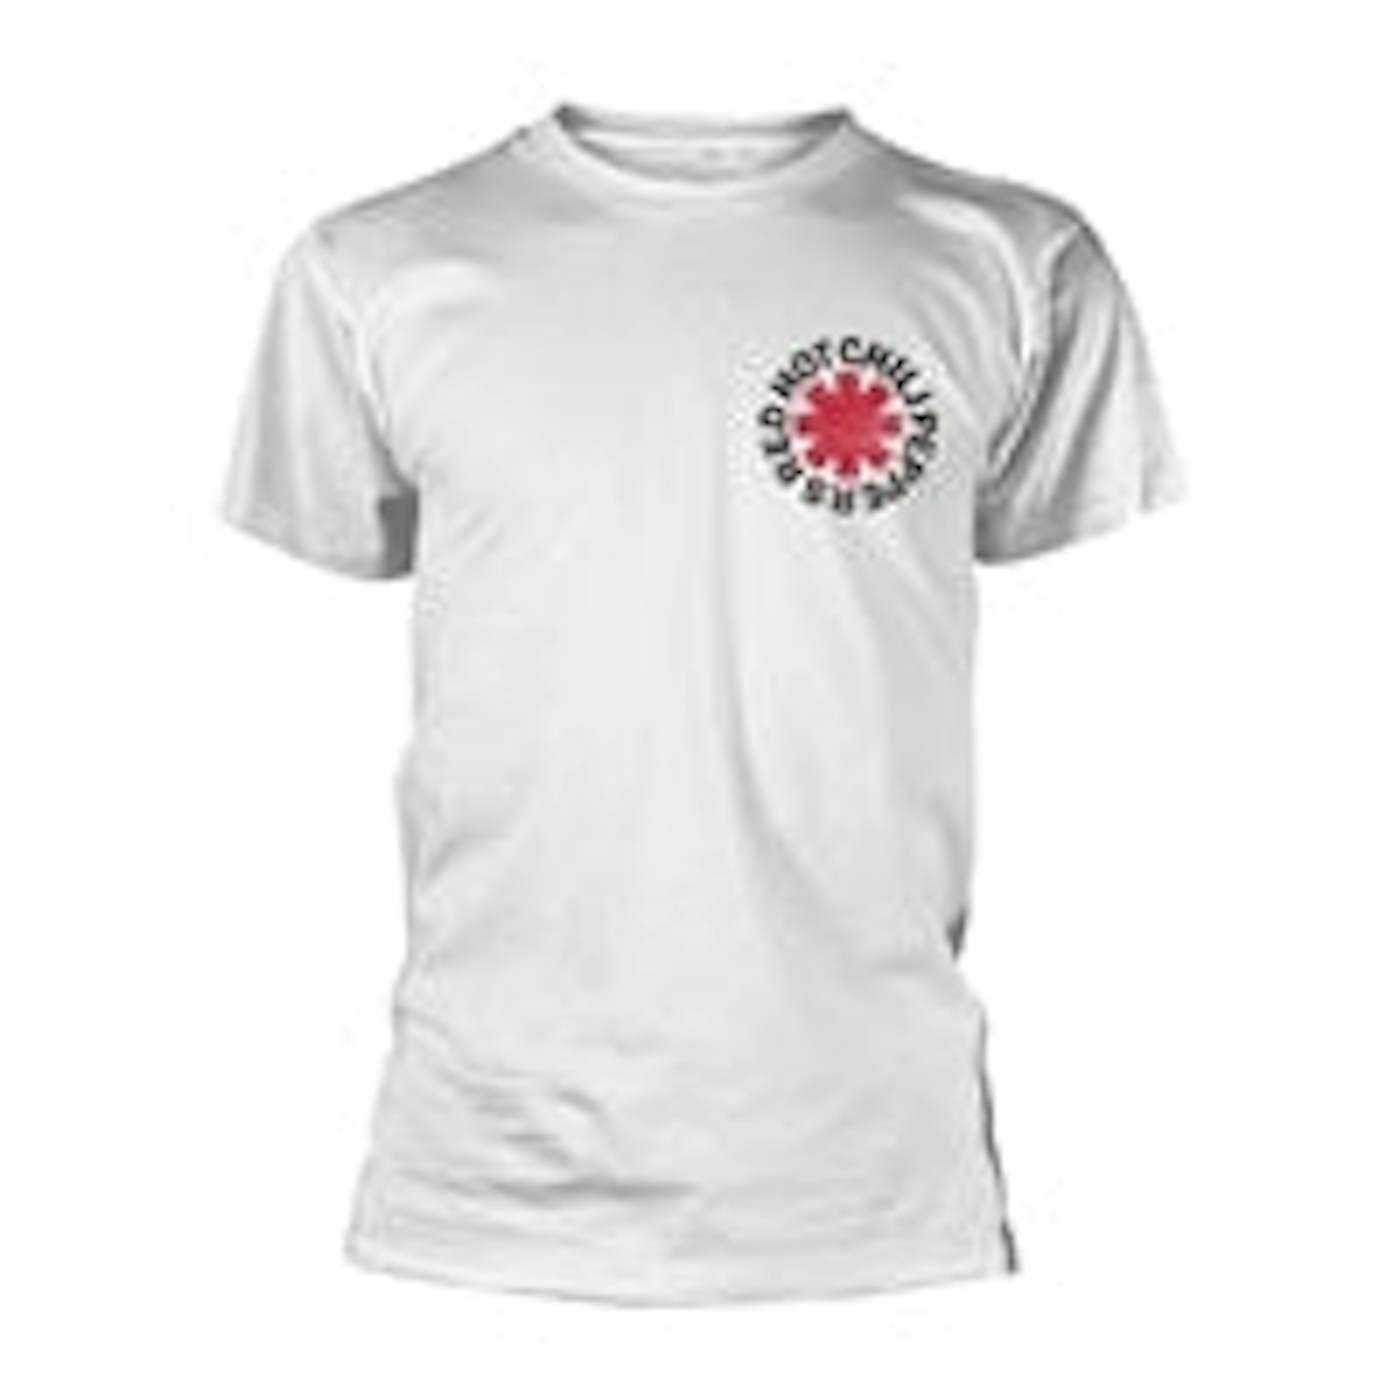 Red Hot Chili Peppers T Shirt - Worn Asterisk